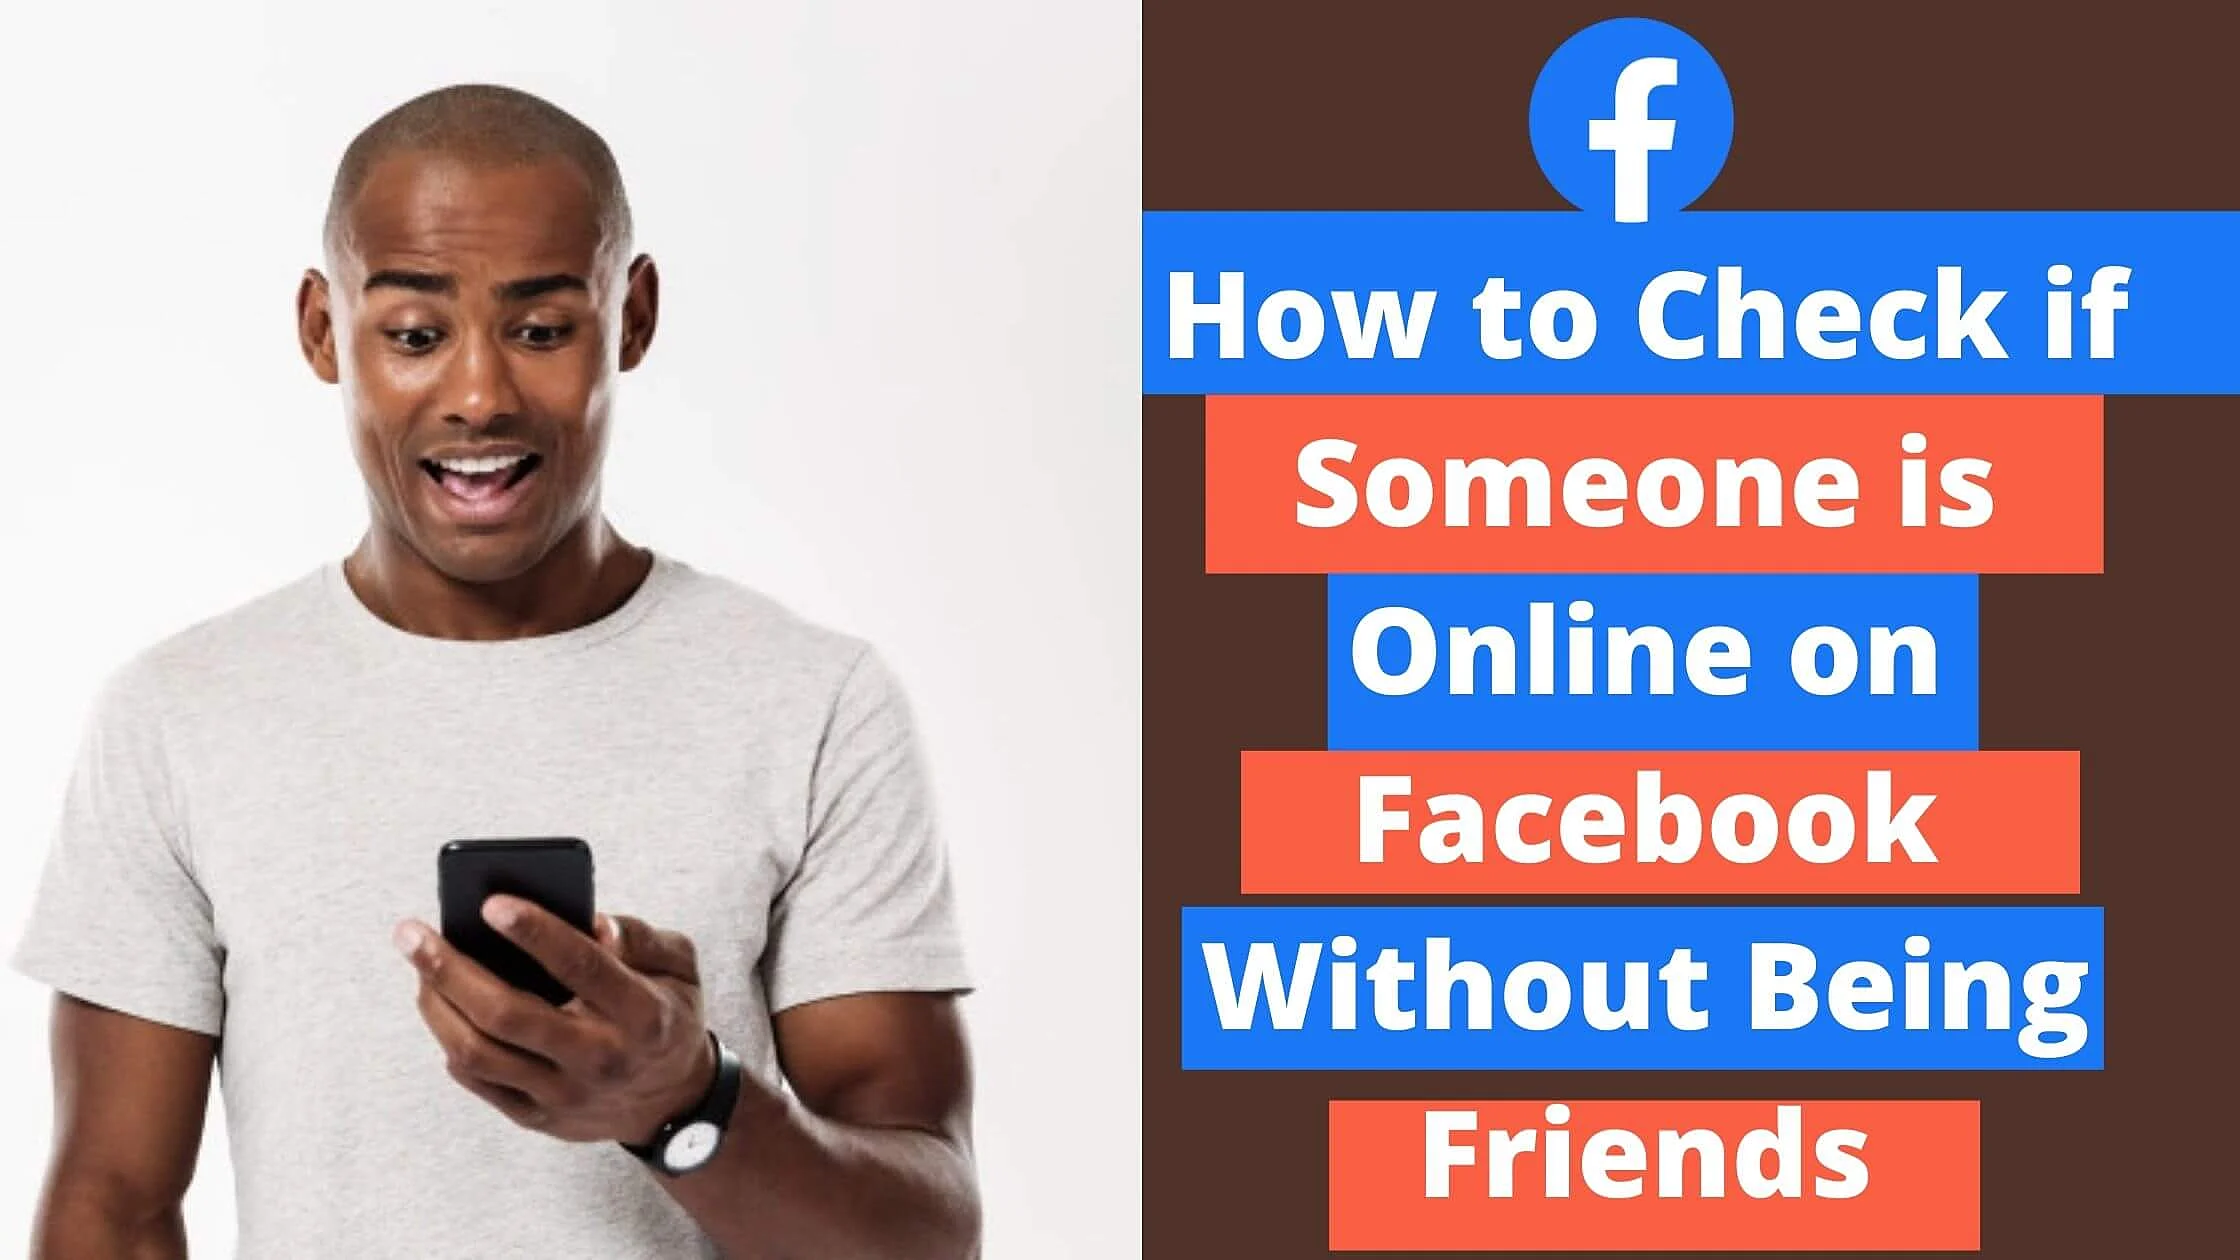 How to Check if Someone is Online on Facebook Without Being Friends